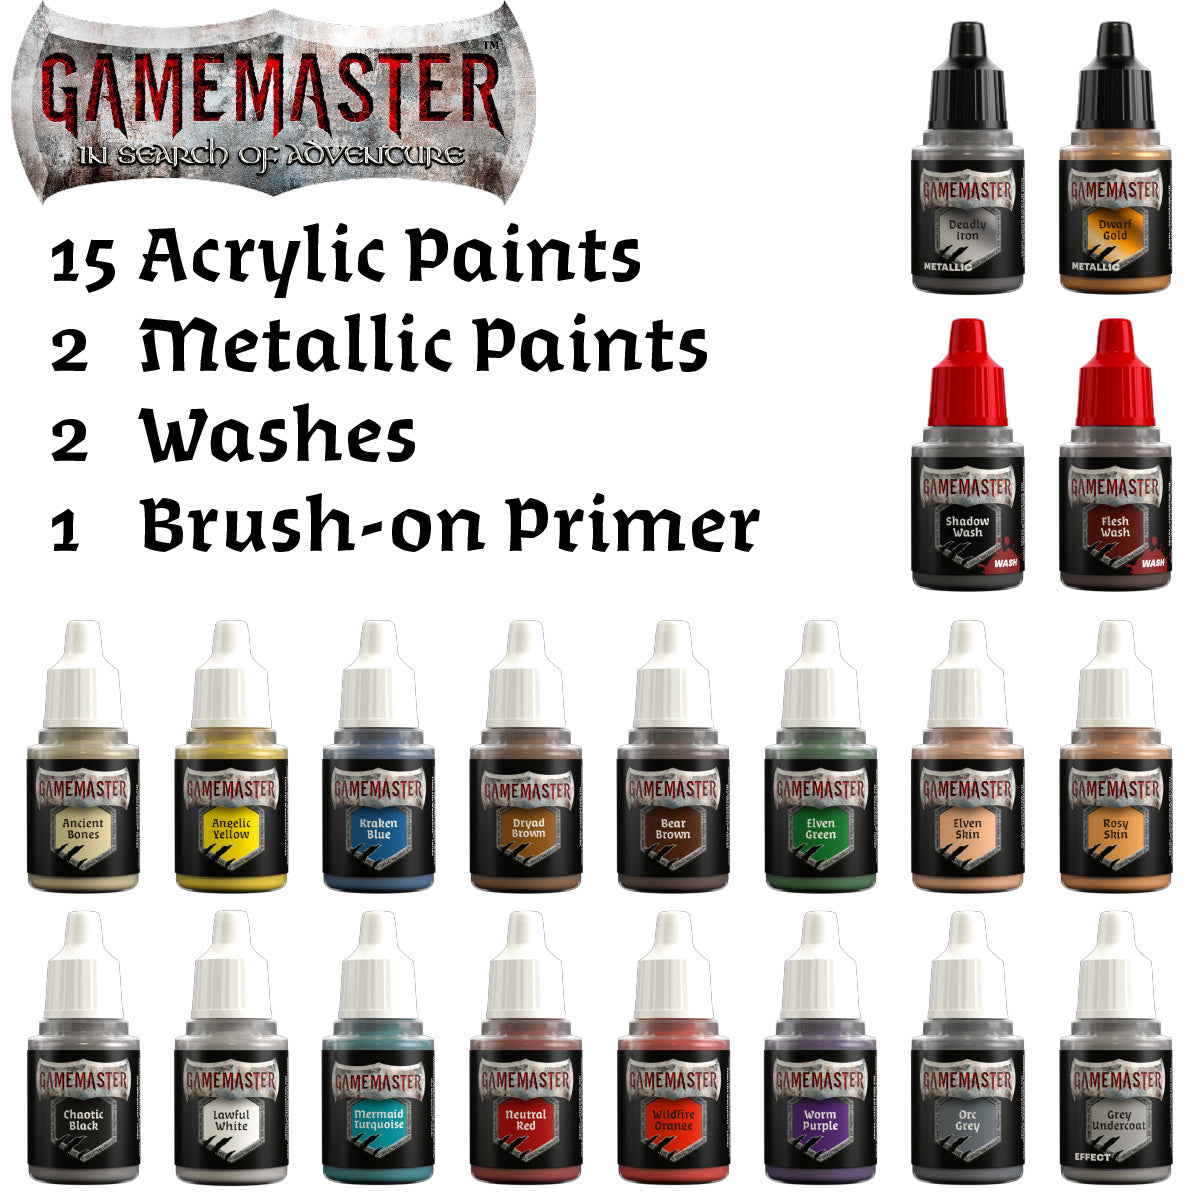 The Army Painter: Wargames Hobby Starter Paint Set – Inked Gaming